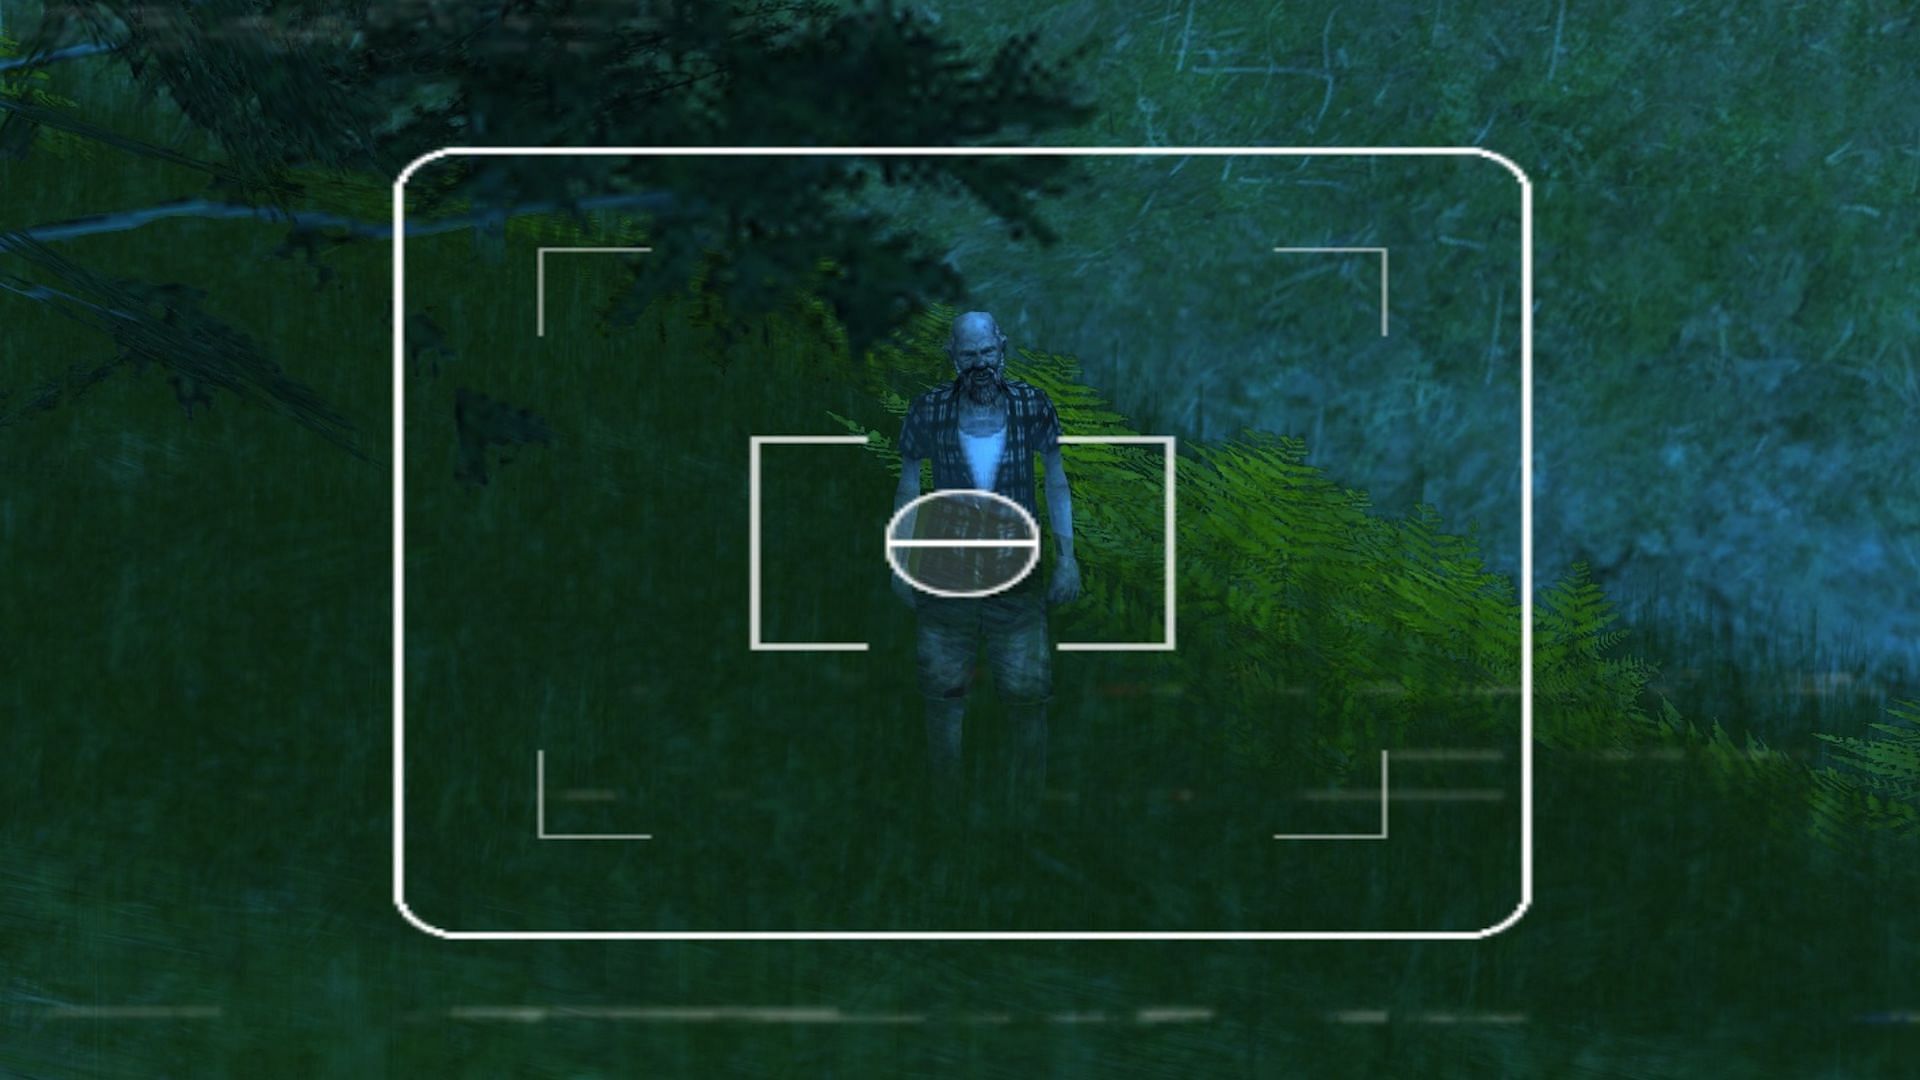 An example of a player photographing a ghost (Image via LibertyCity.ru)